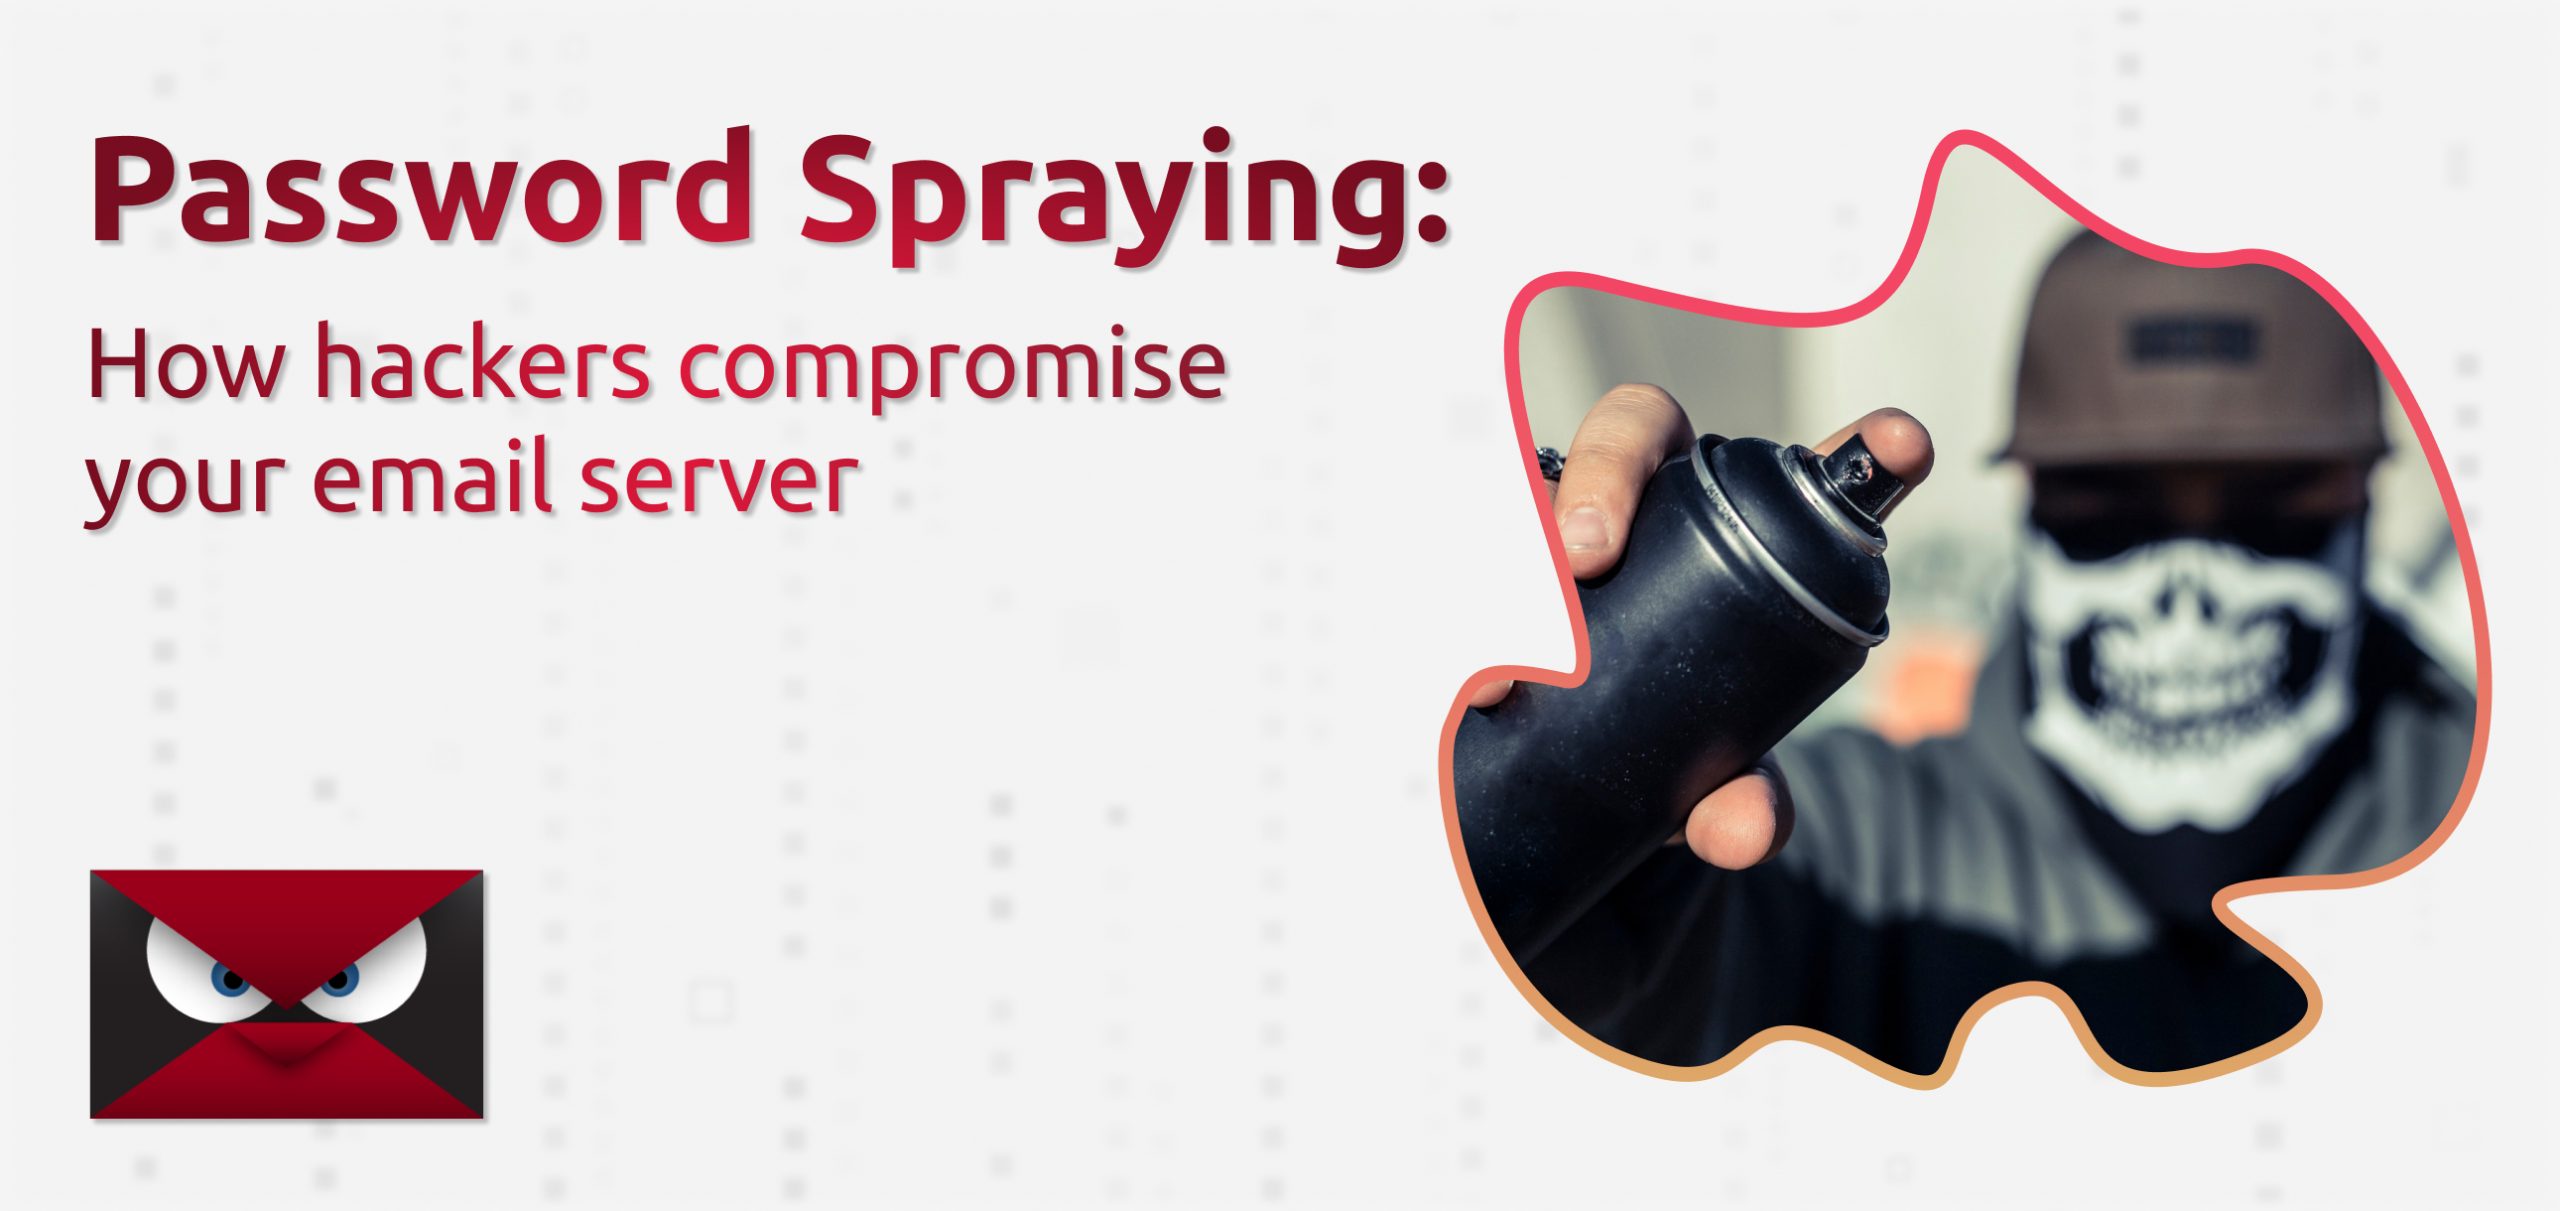 password spraying how hackers compromise your email server man spraying can